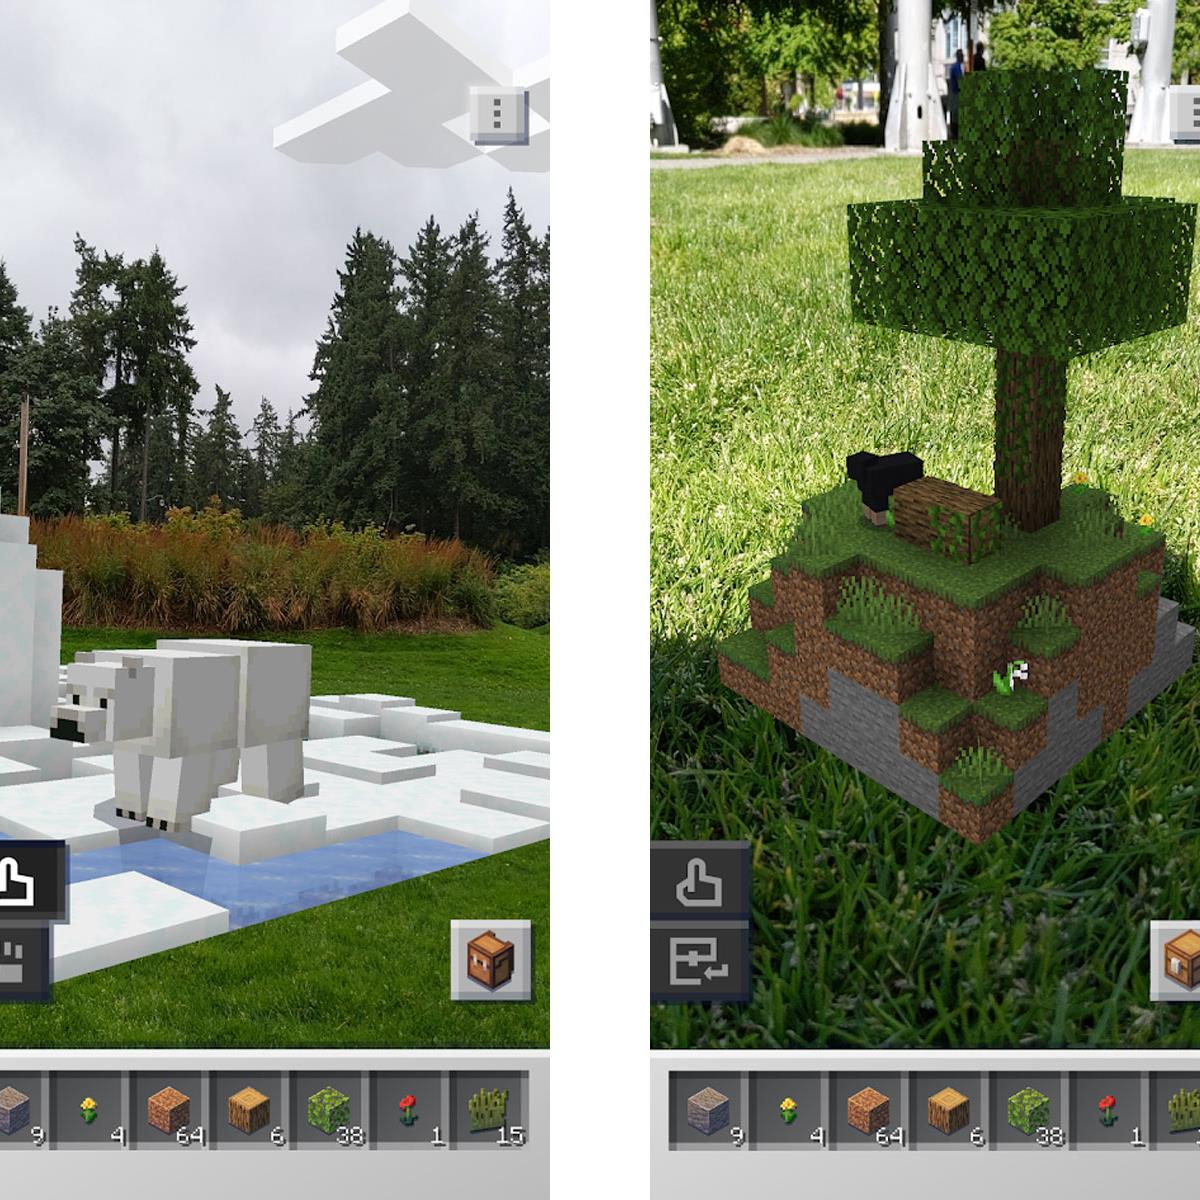 Download Minecraft Earth Beta v0.6.0 MOD APK Free For Android, iOS